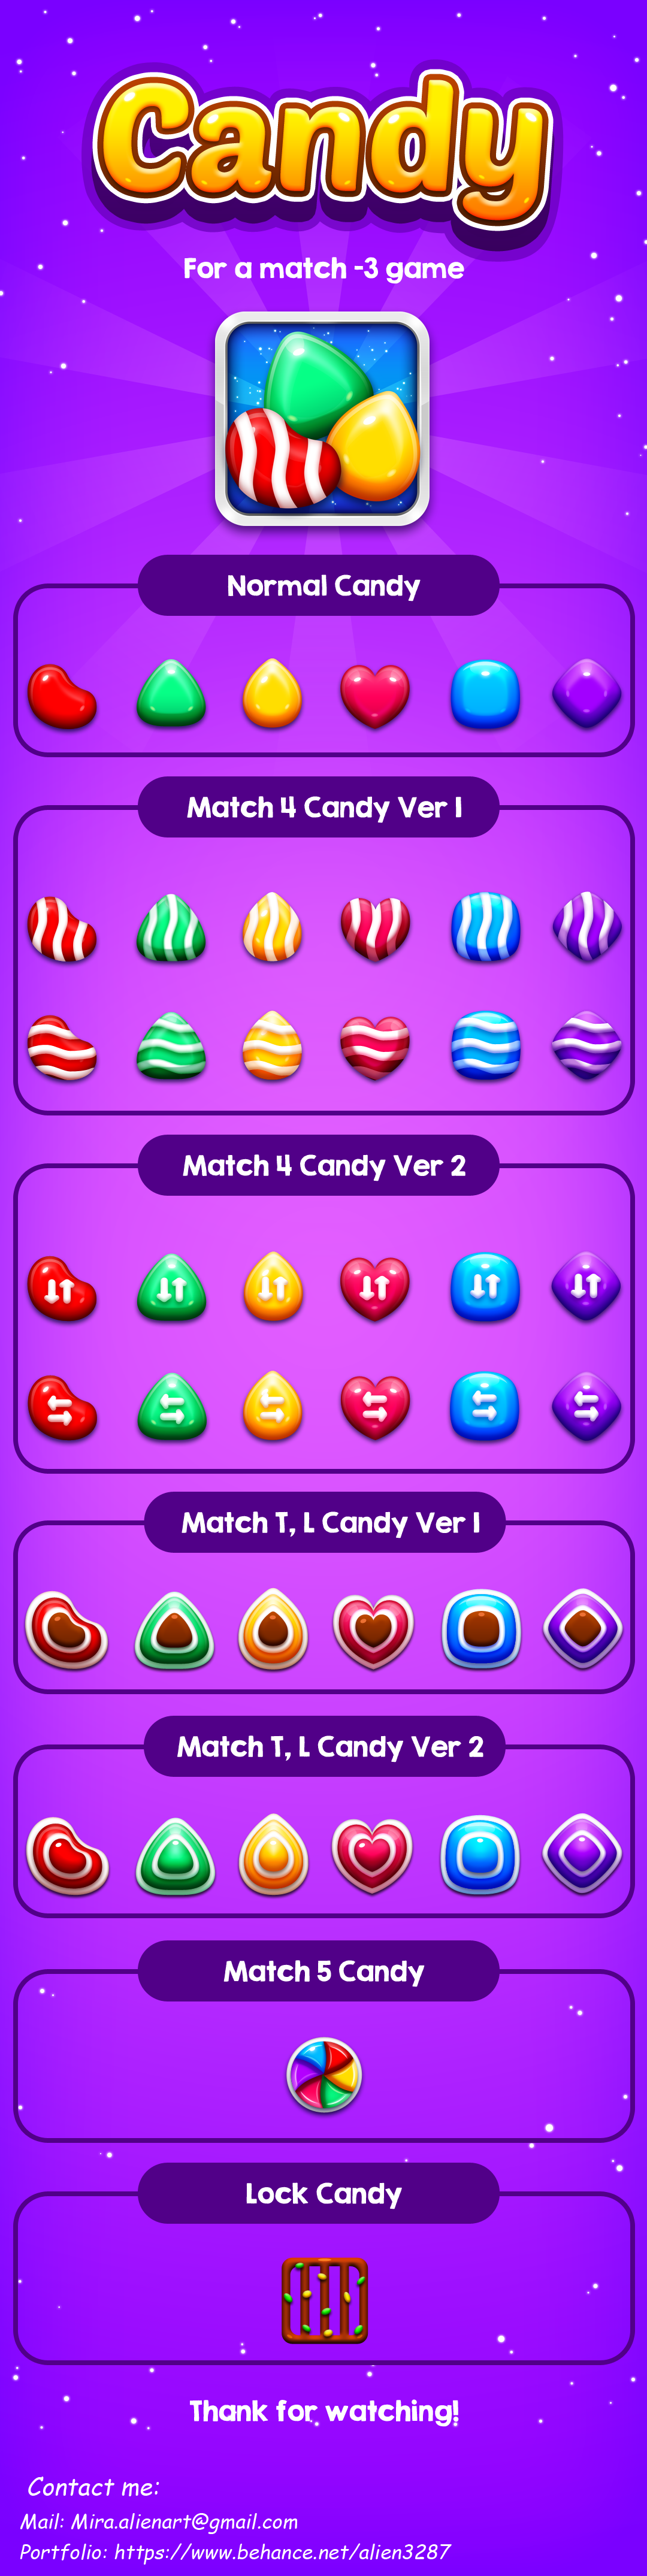 Assets Game: Candy on Behance